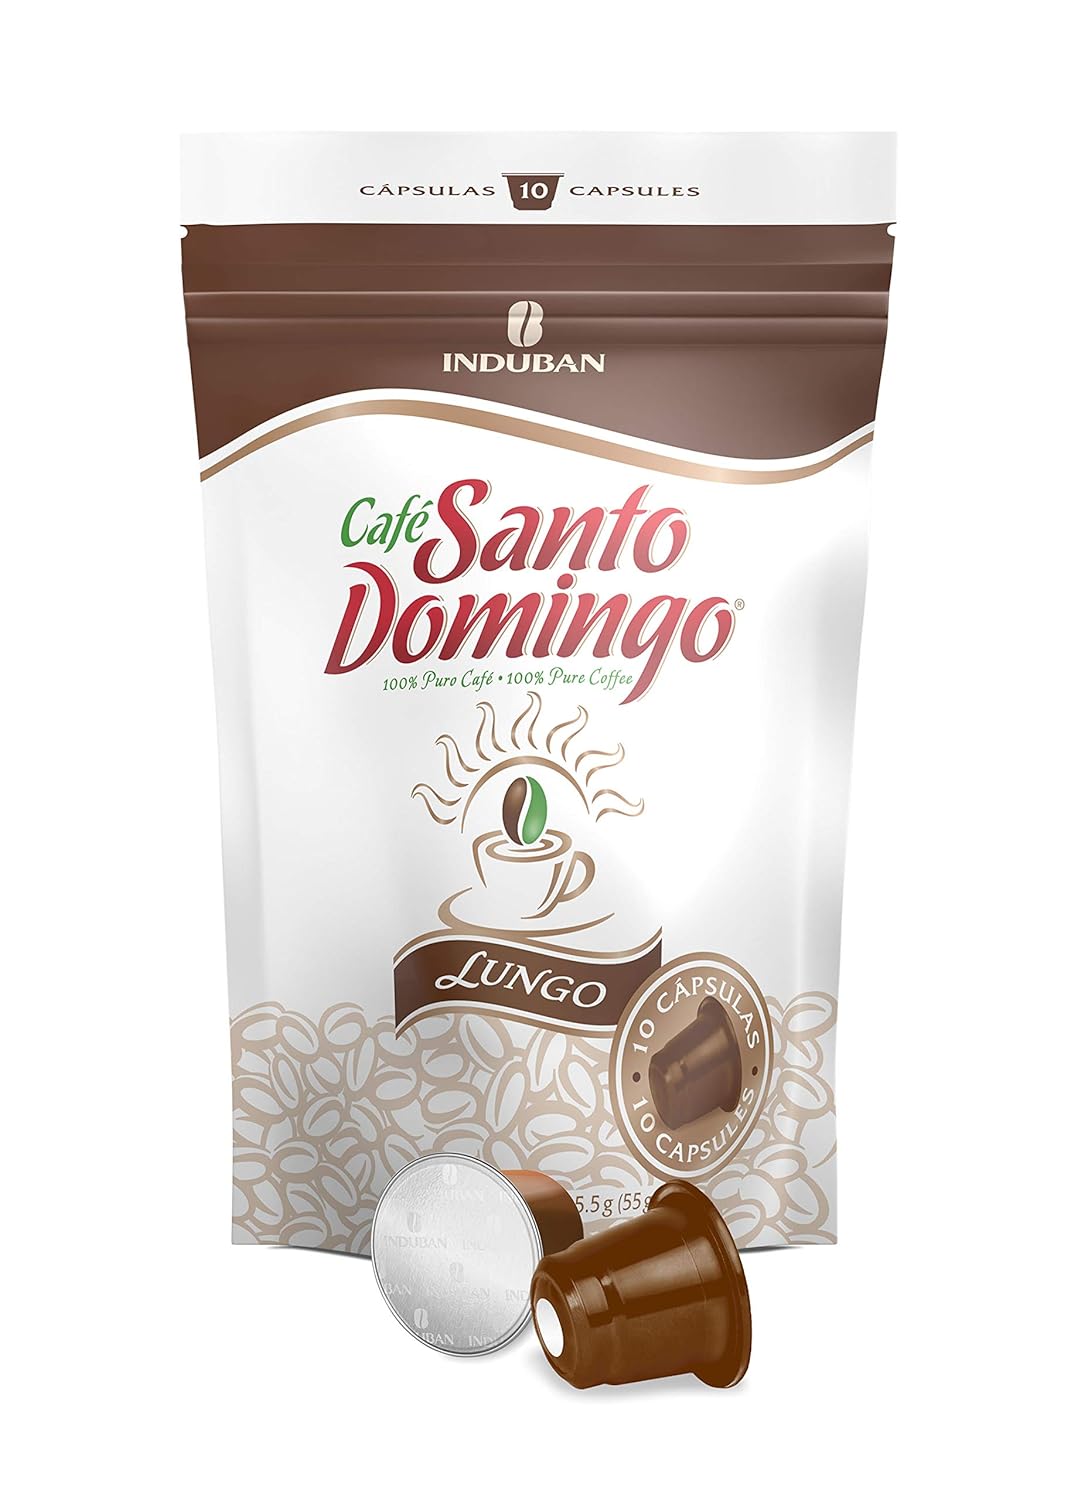 Santo Domingo Coffee Lungo Capsules - Compatible with Nespresso Original Brewers - Product from the Dominican Republic (10 Count)